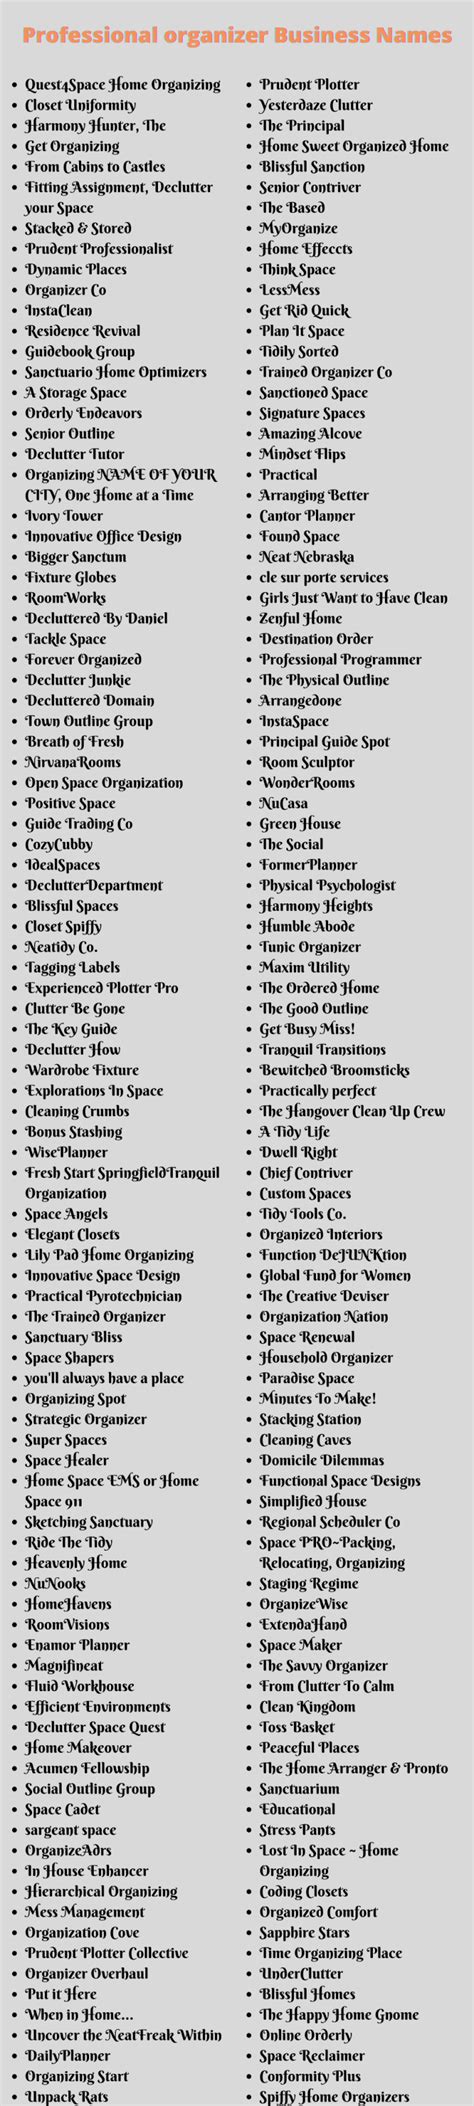 400+ Best and Professional Organizer Business Names